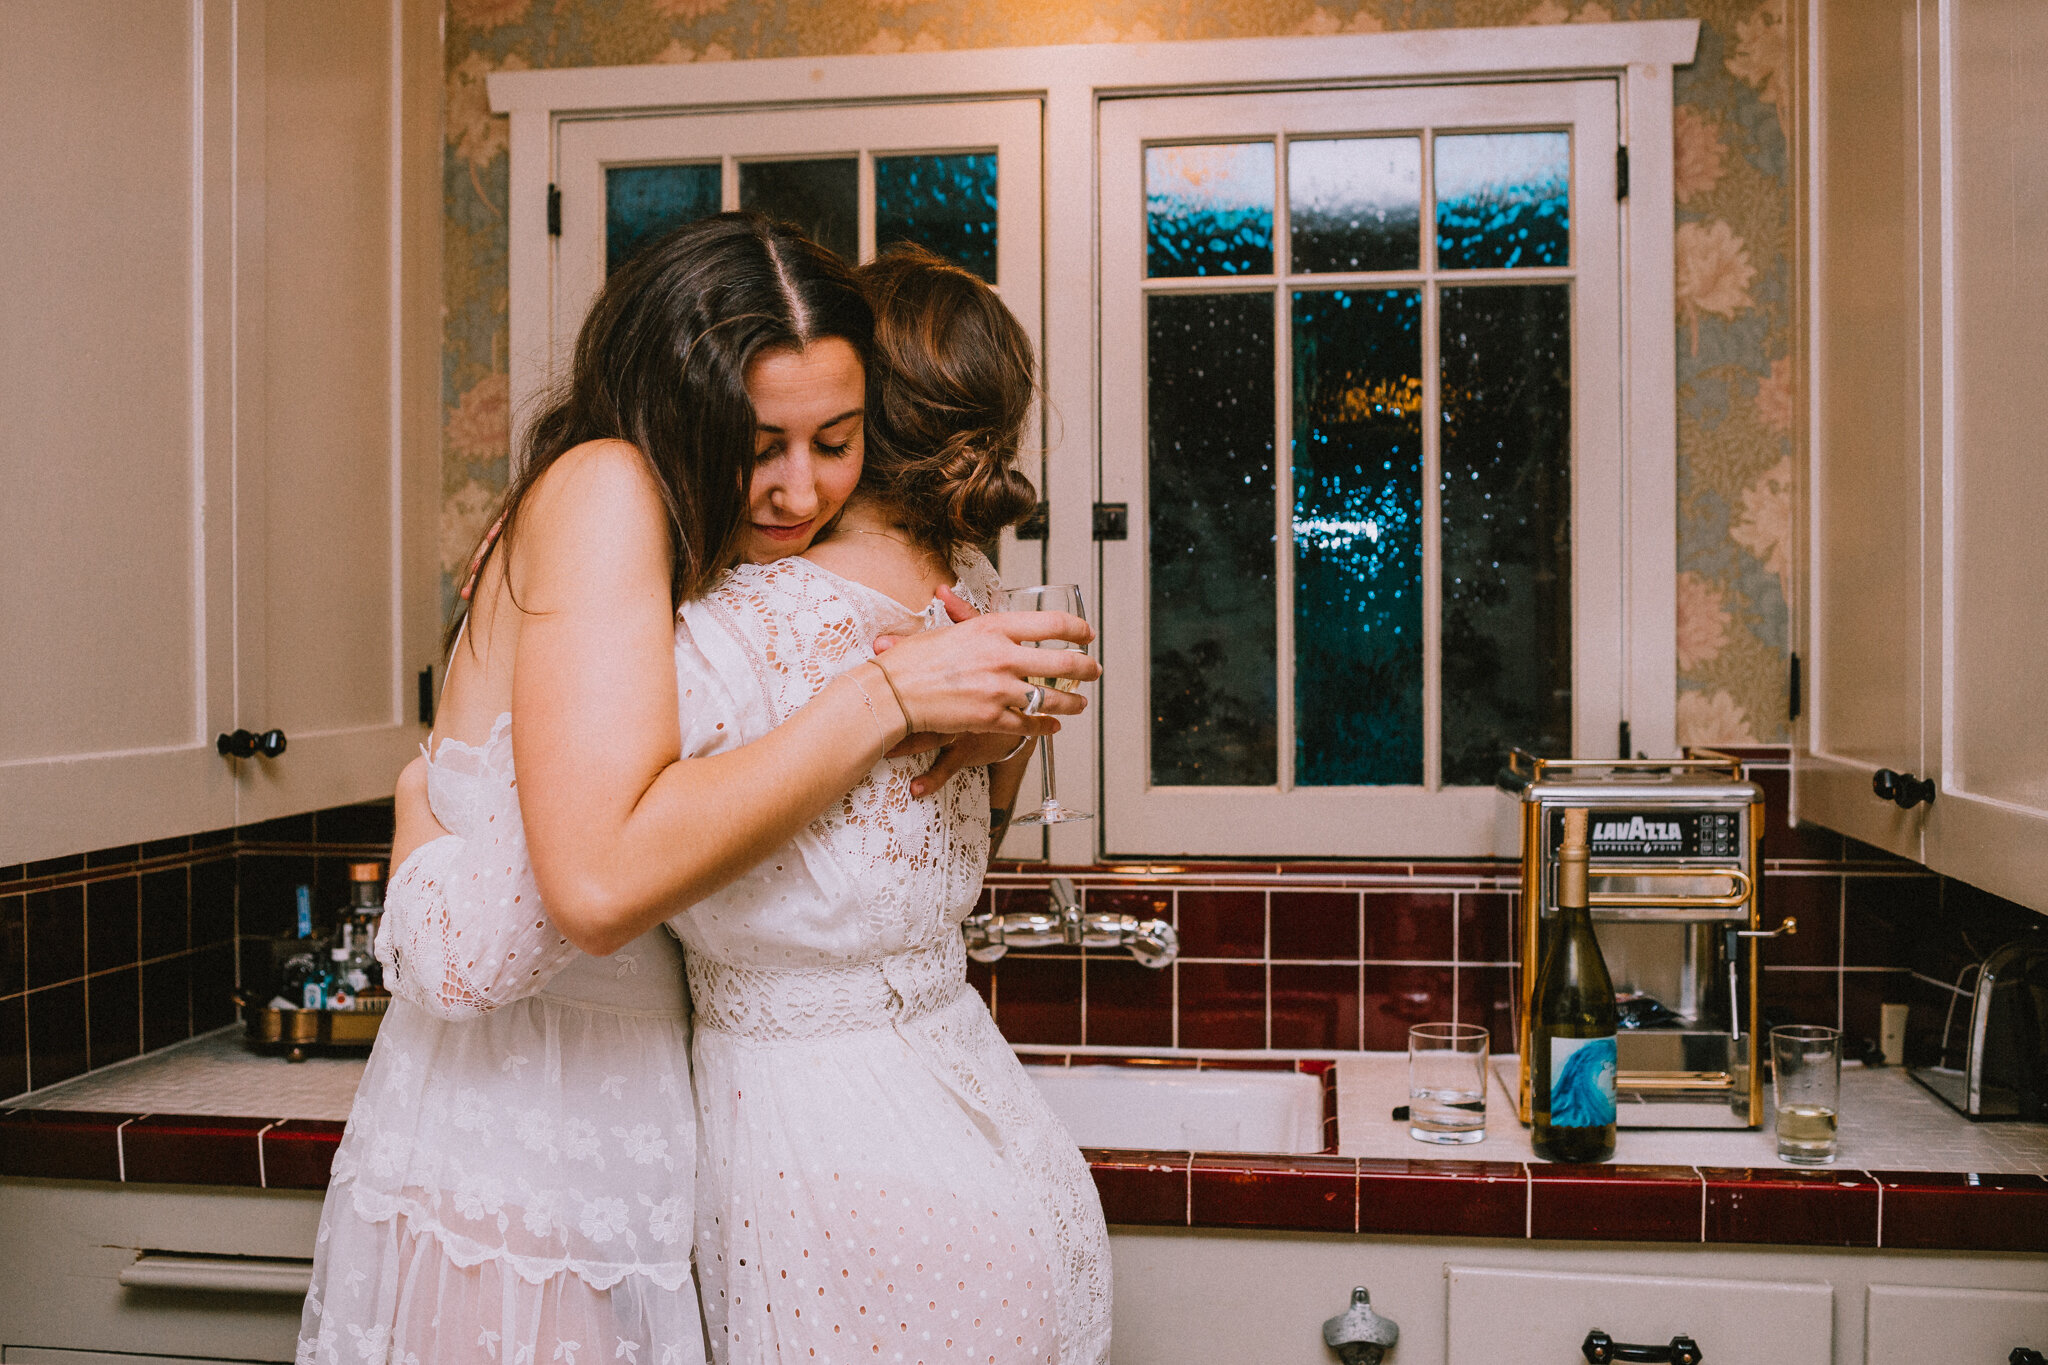 Two women embrace in the kitchen.